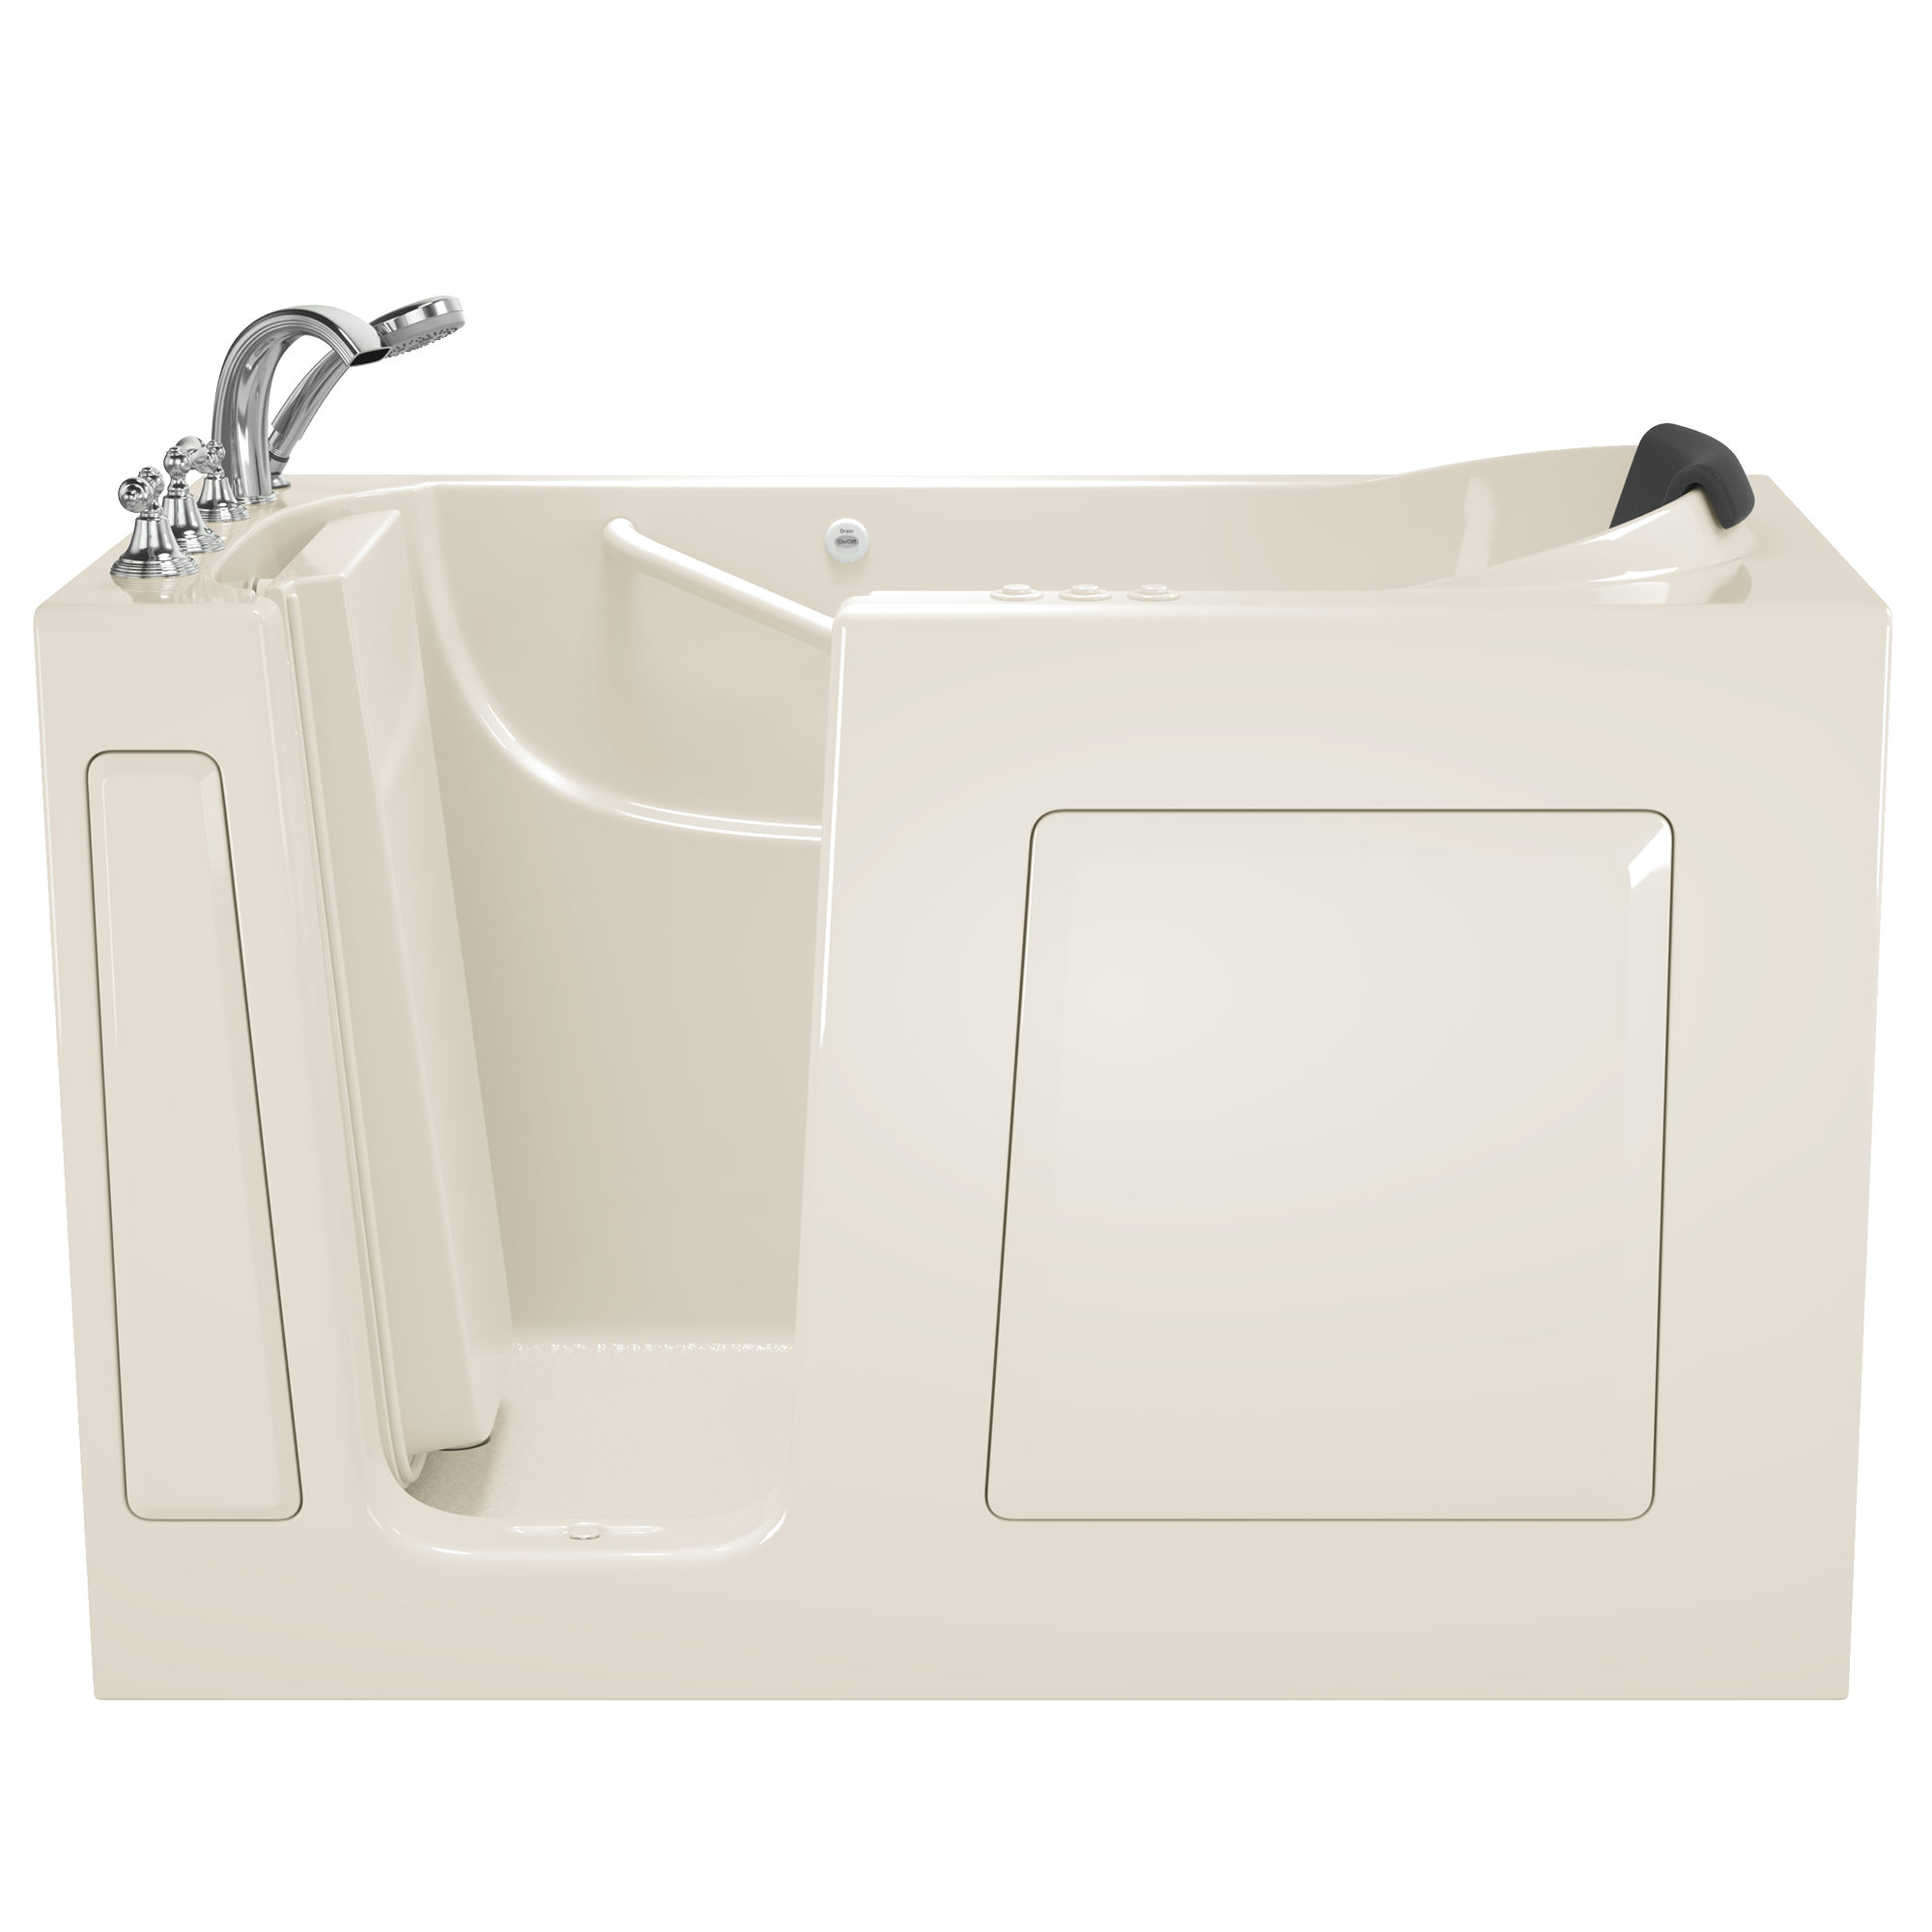 Gelcoat Premium Series 30 x 60  Inch Walk in Tub With Combination Air Spa and Whirlpool Systems   Left Hand Drain With Faucet WIB LINEN